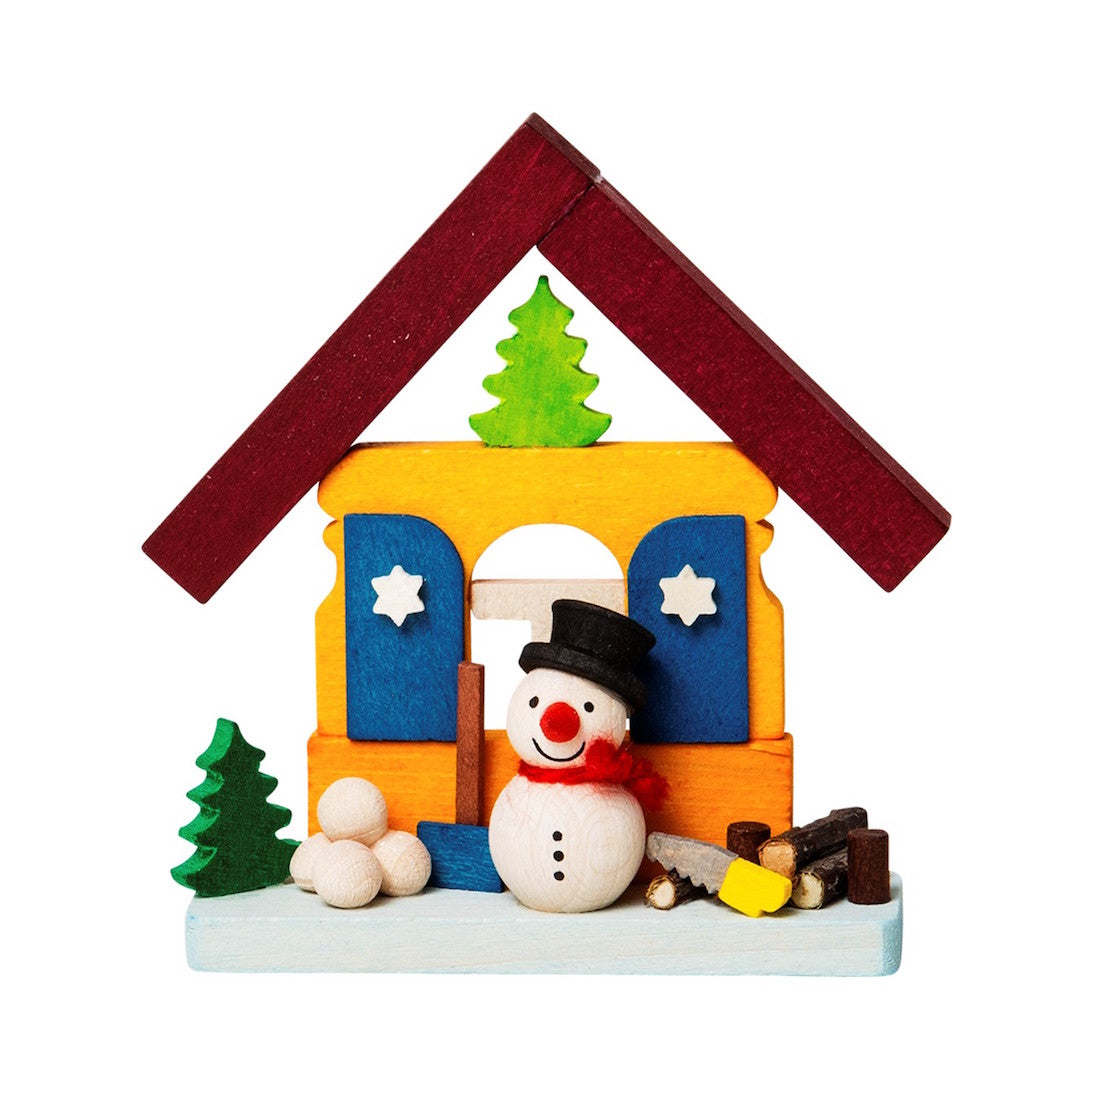 House Ornament with Smowman by Graupner Holzminiaturen